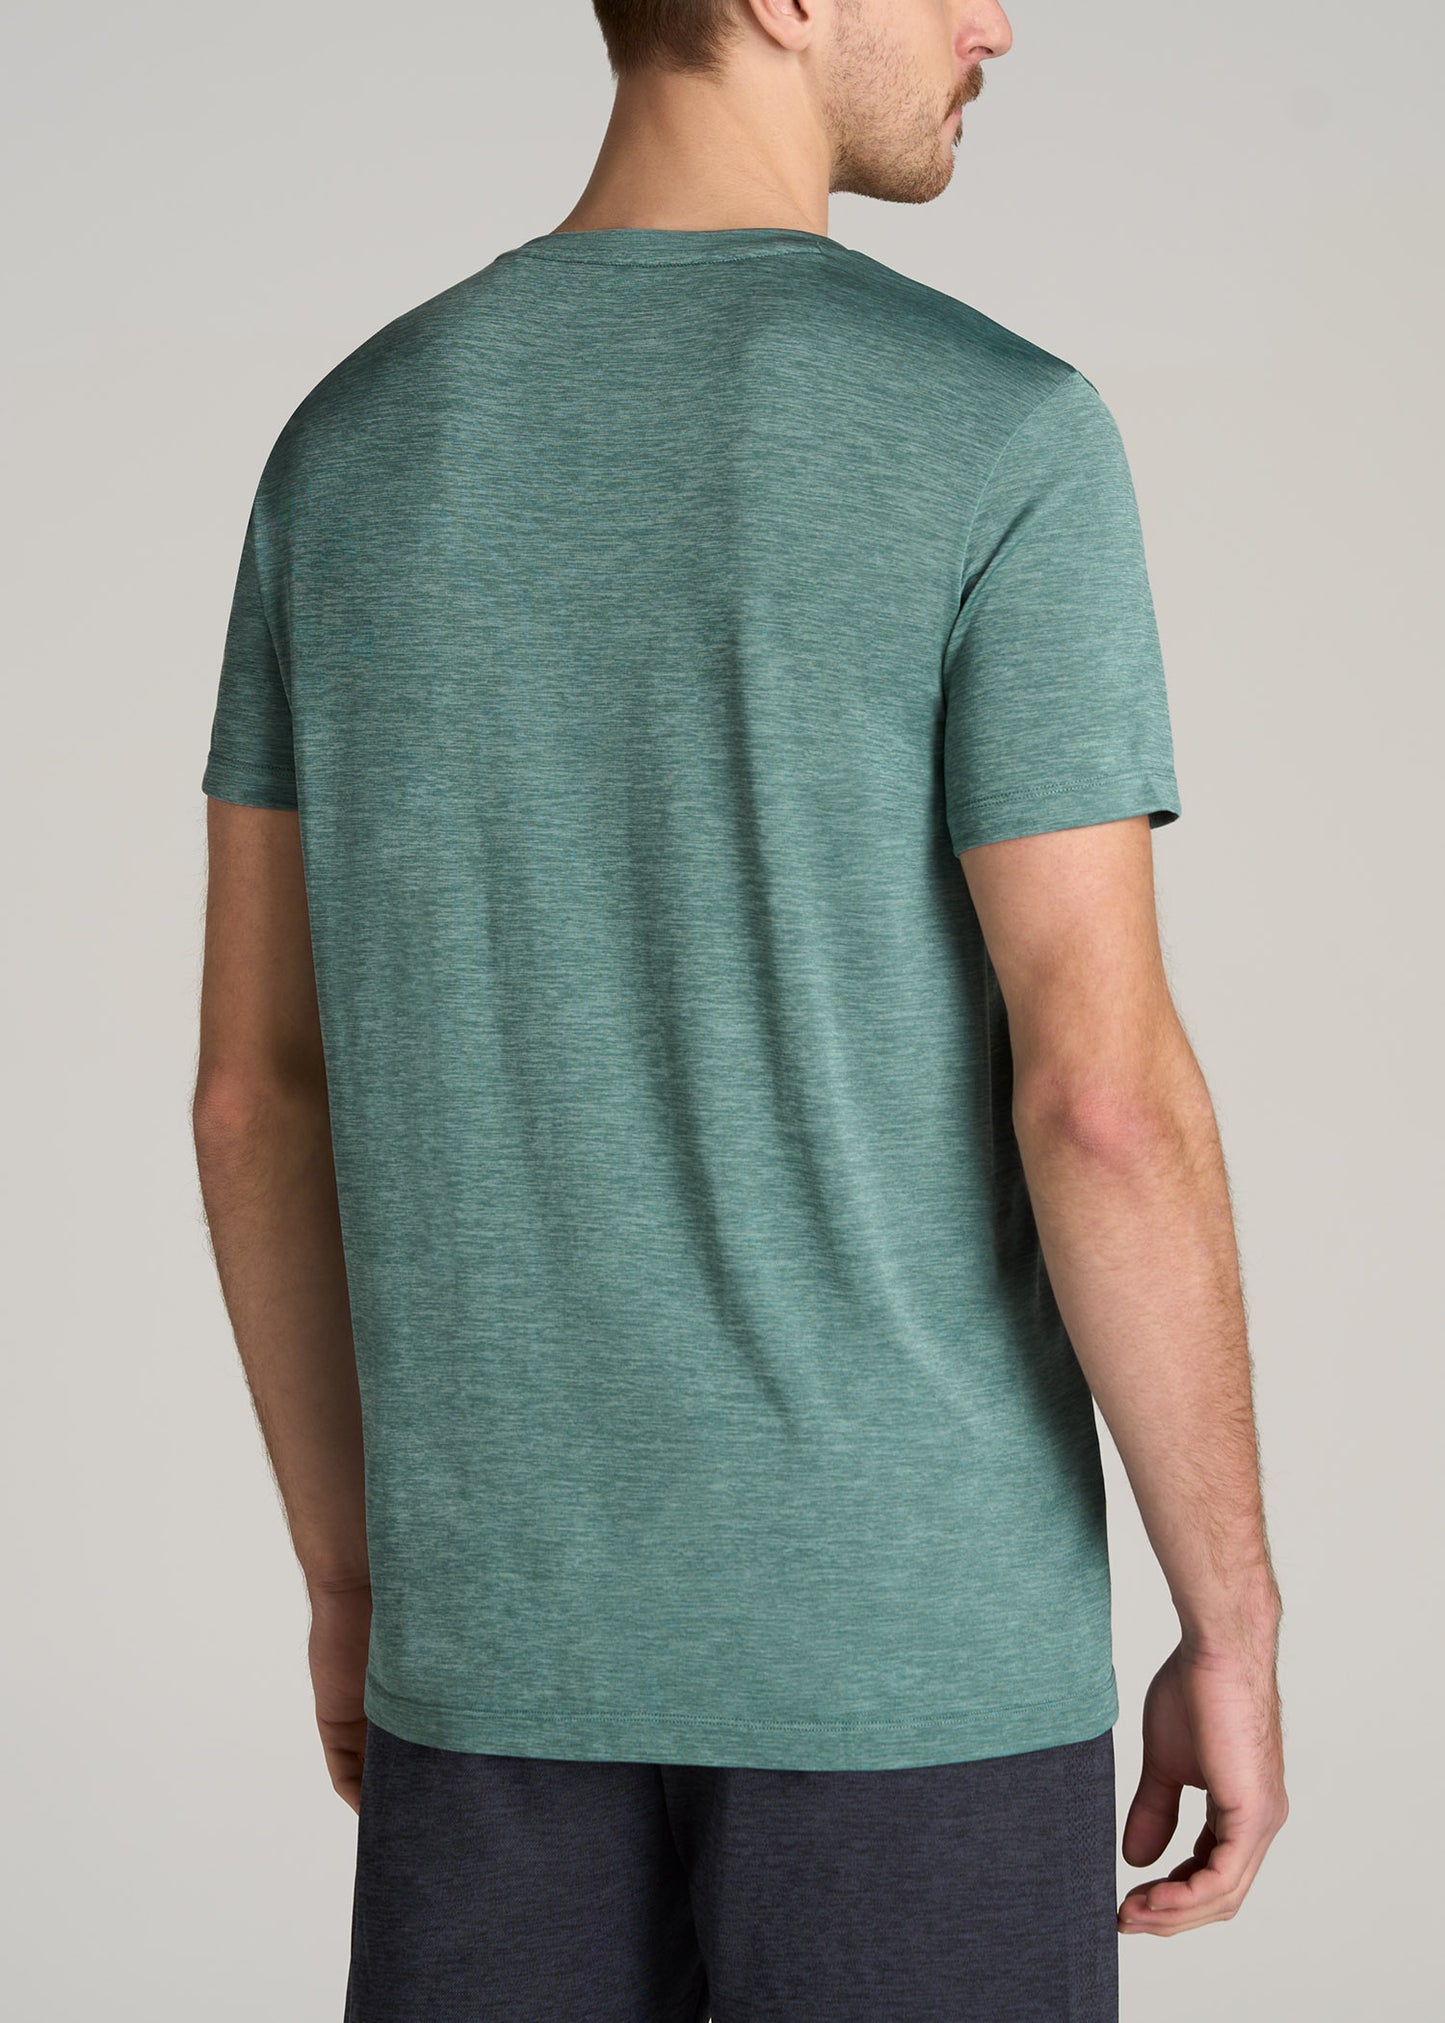 American-Tall-Men-Performance-MODERN-FIT-Athletic-Jersey-Tee-Green-Mix-back